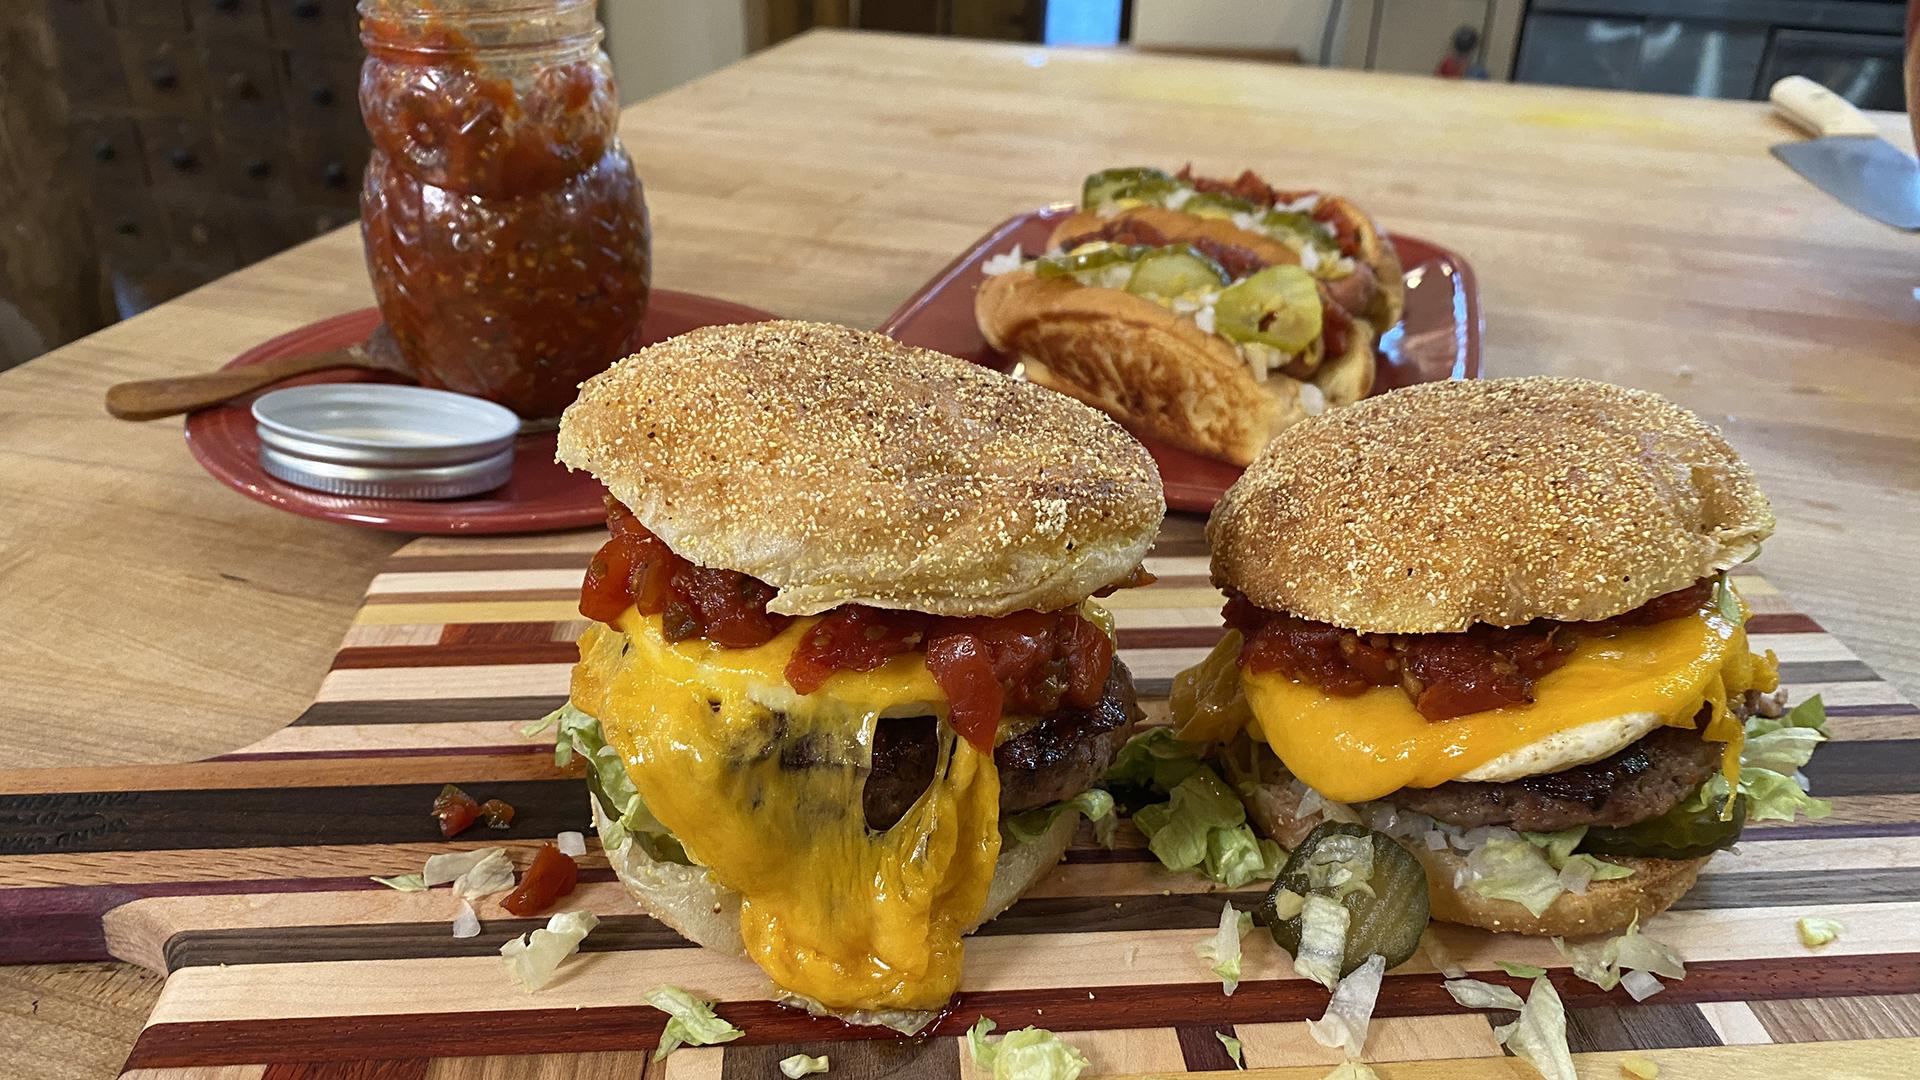 English Muffin BEC (Bacon, Egg & Cheese) Burgers with Tomato Jam